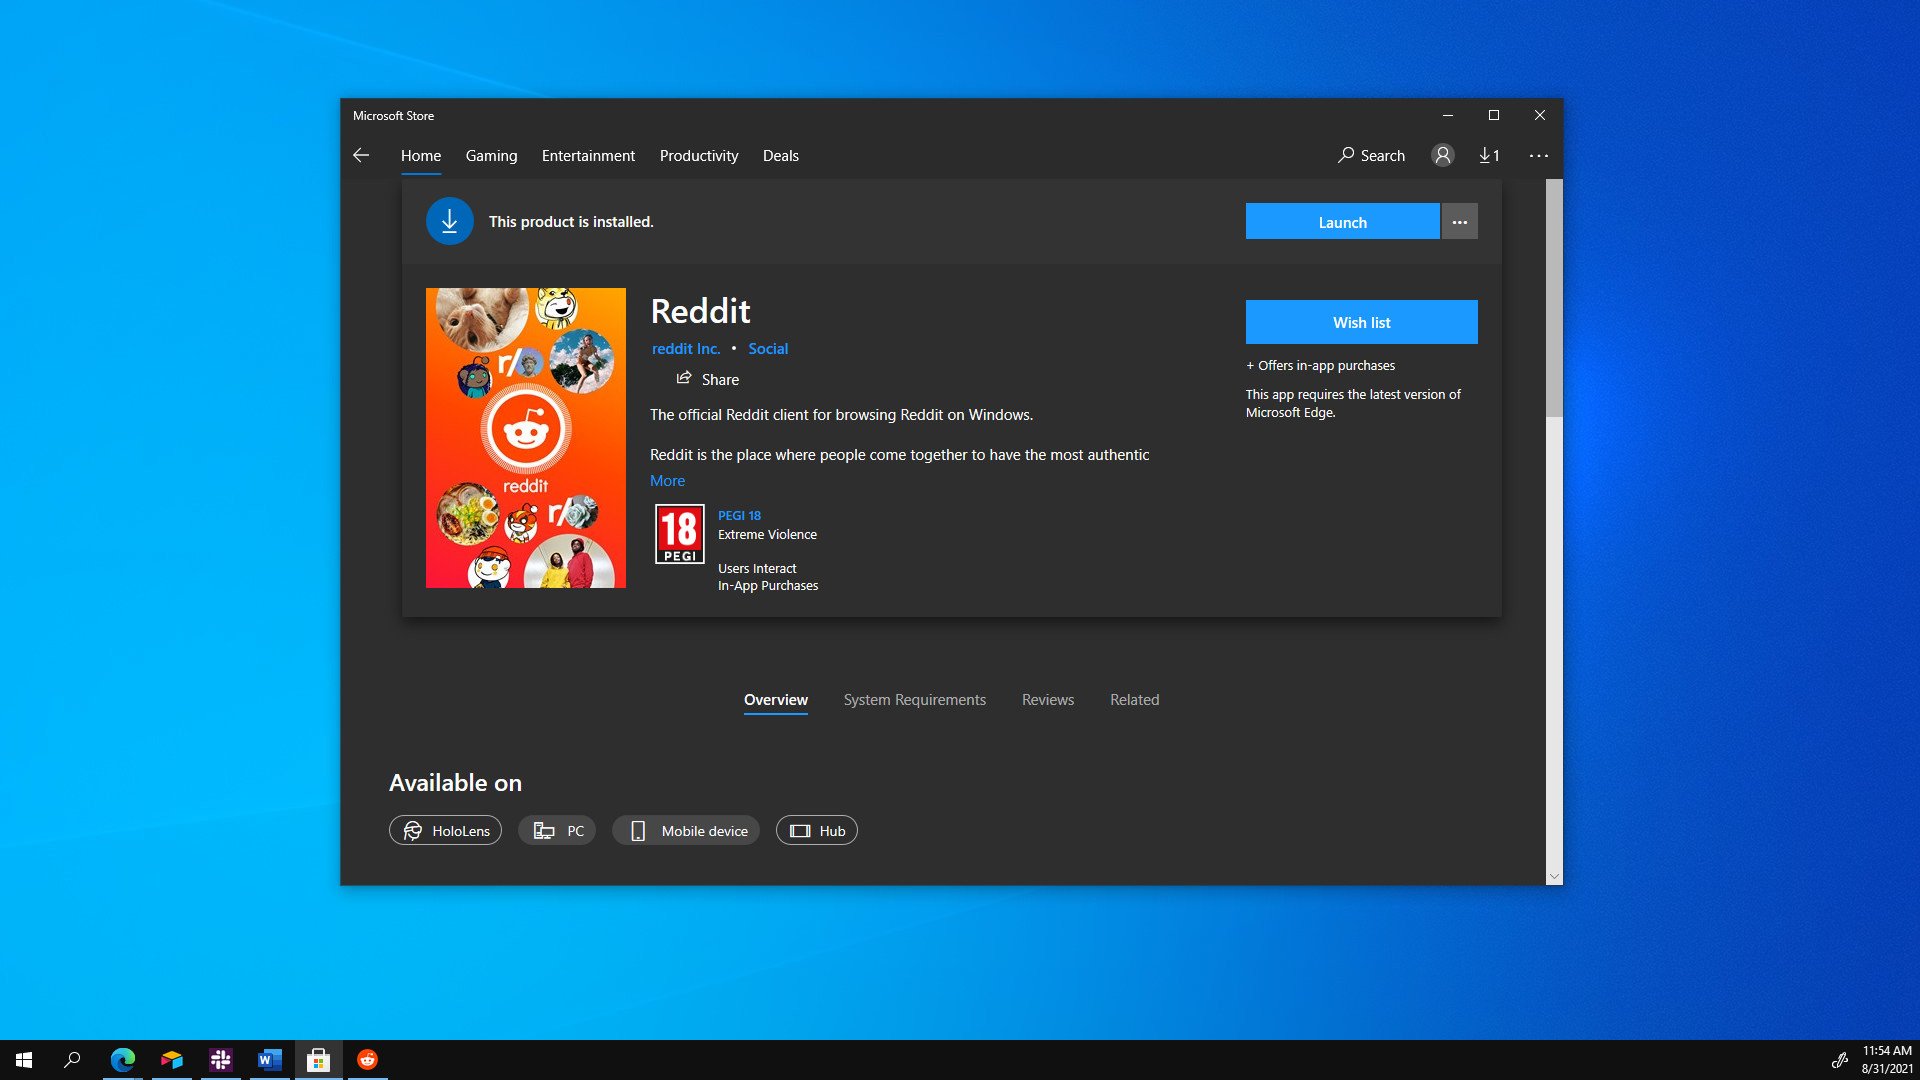 Reddit officially launches in Microsoft Store as a progressive web app